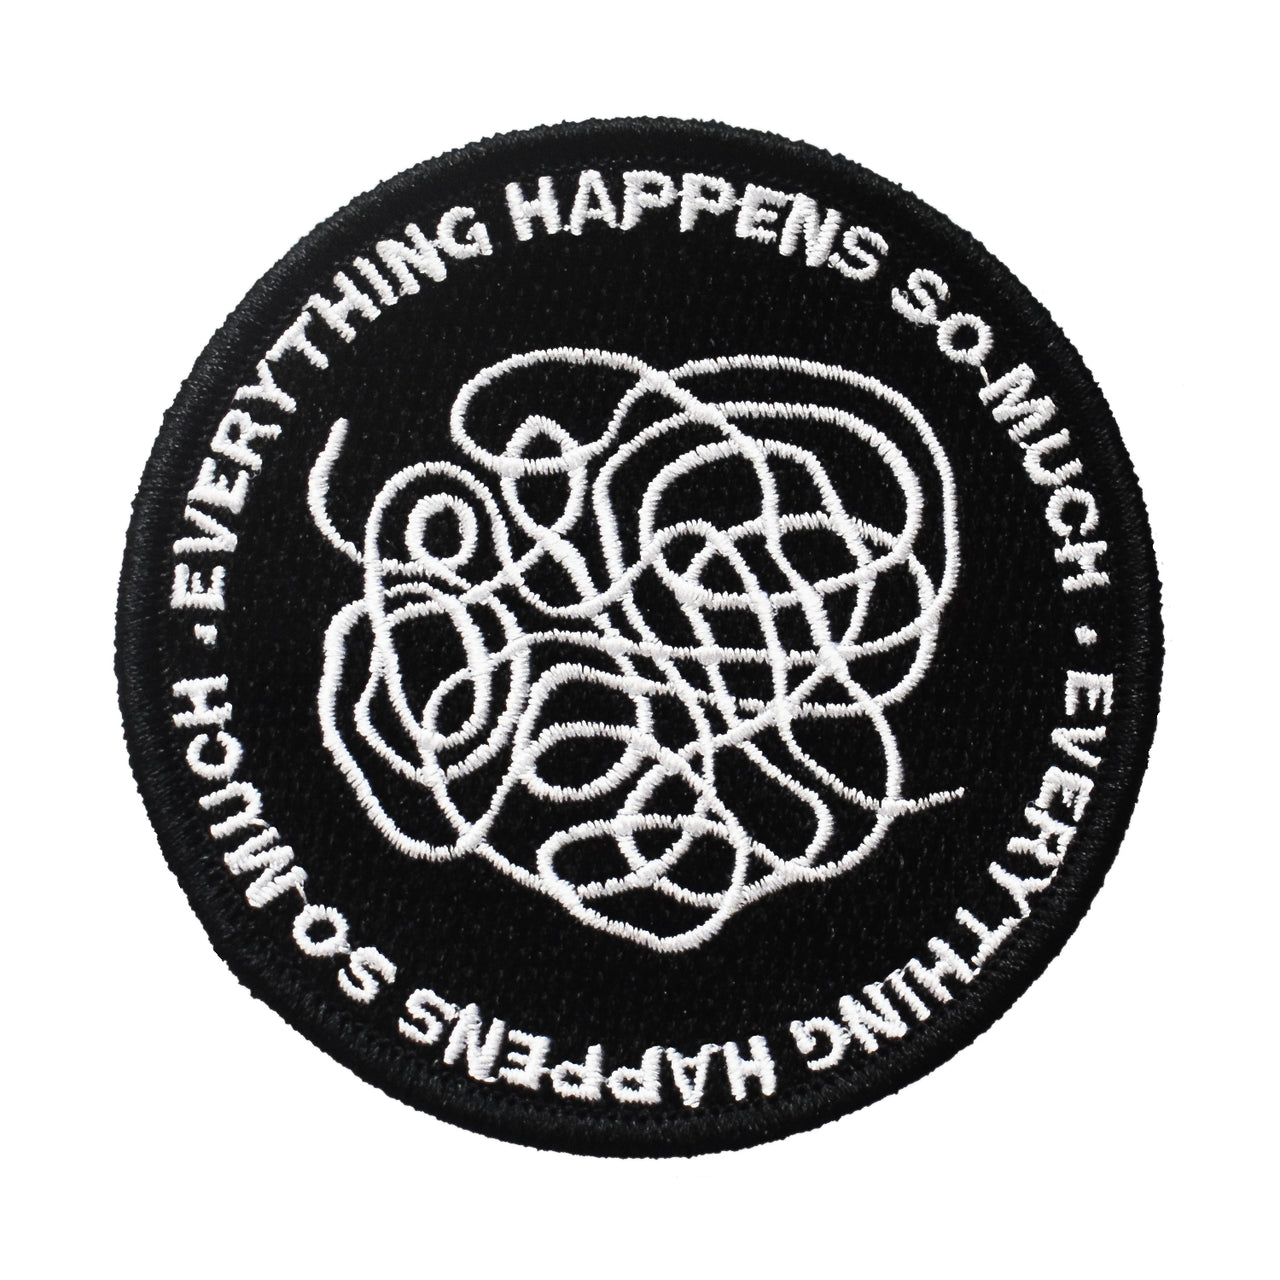 Everything Happens So Much (Iron-On Patch)